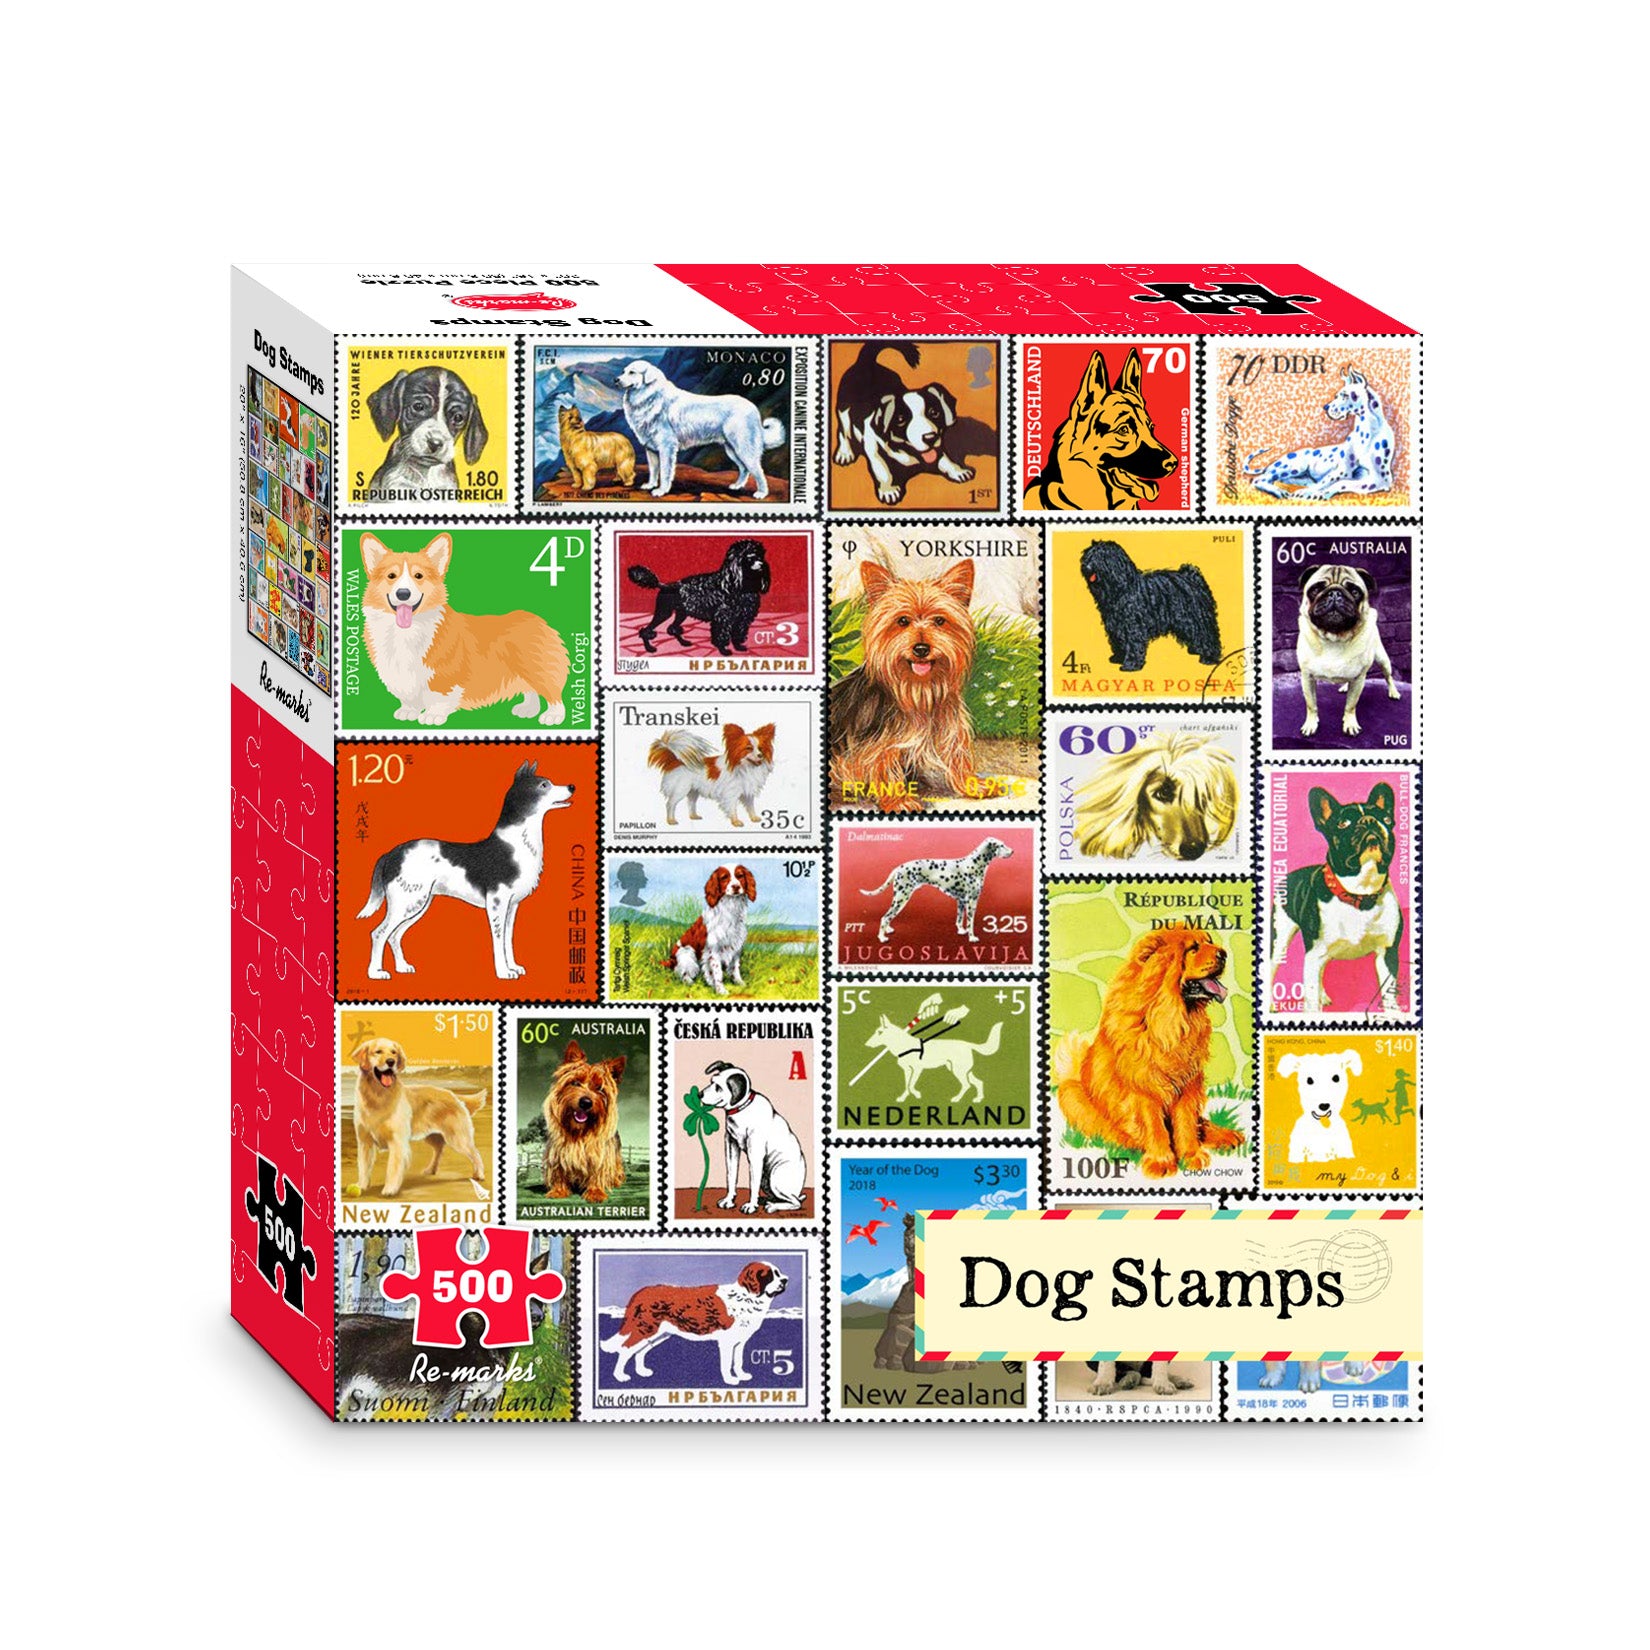 Love Letters Stamps Collage 1000-Piece Jigsaw Puzzle – Re-marks, Inc.